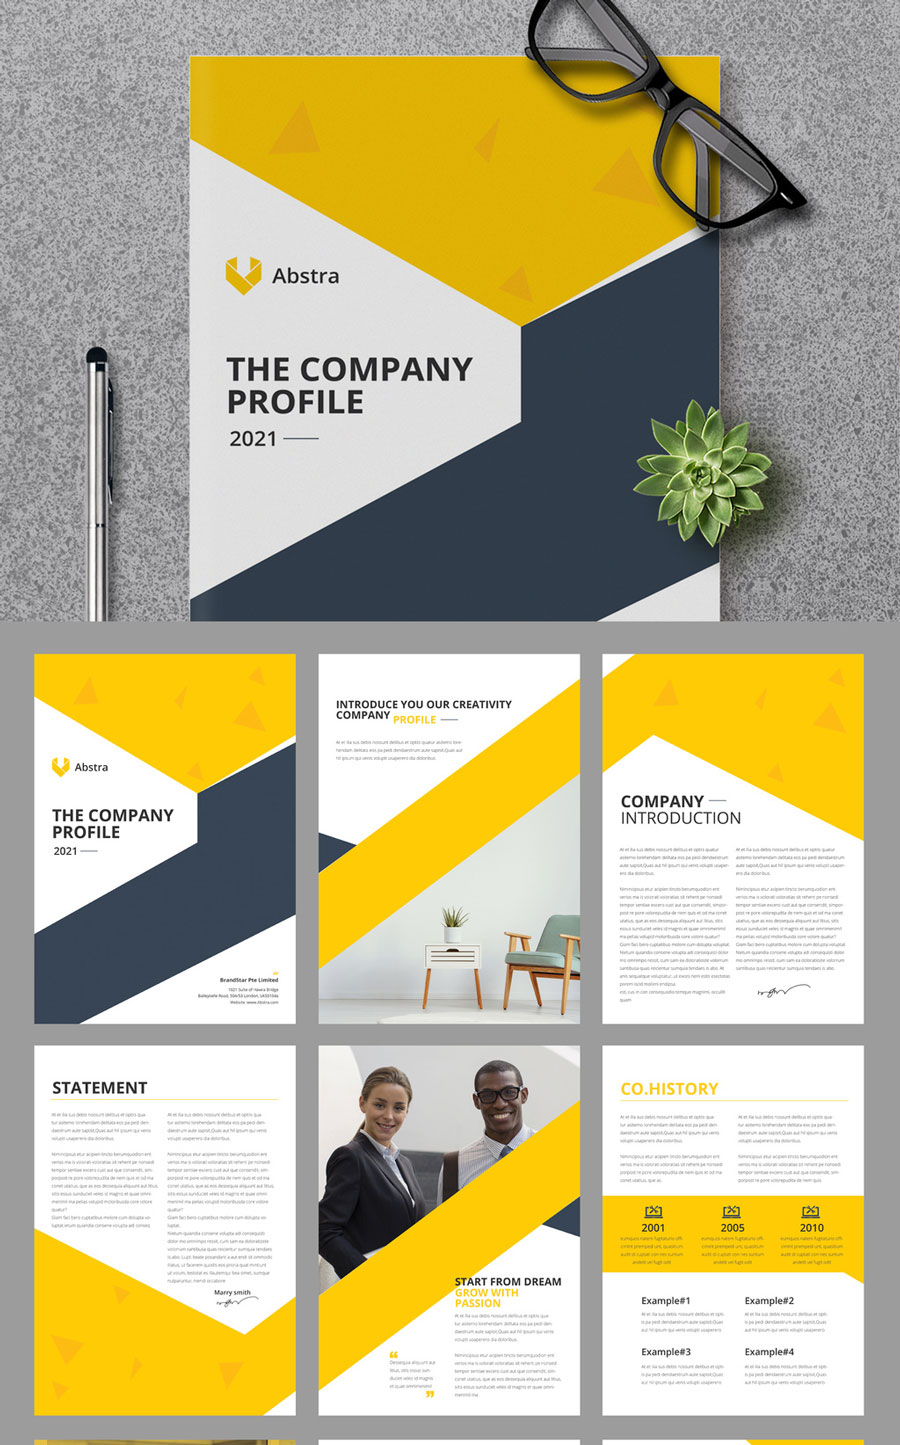 Company Profile Layout with Yellow Accents